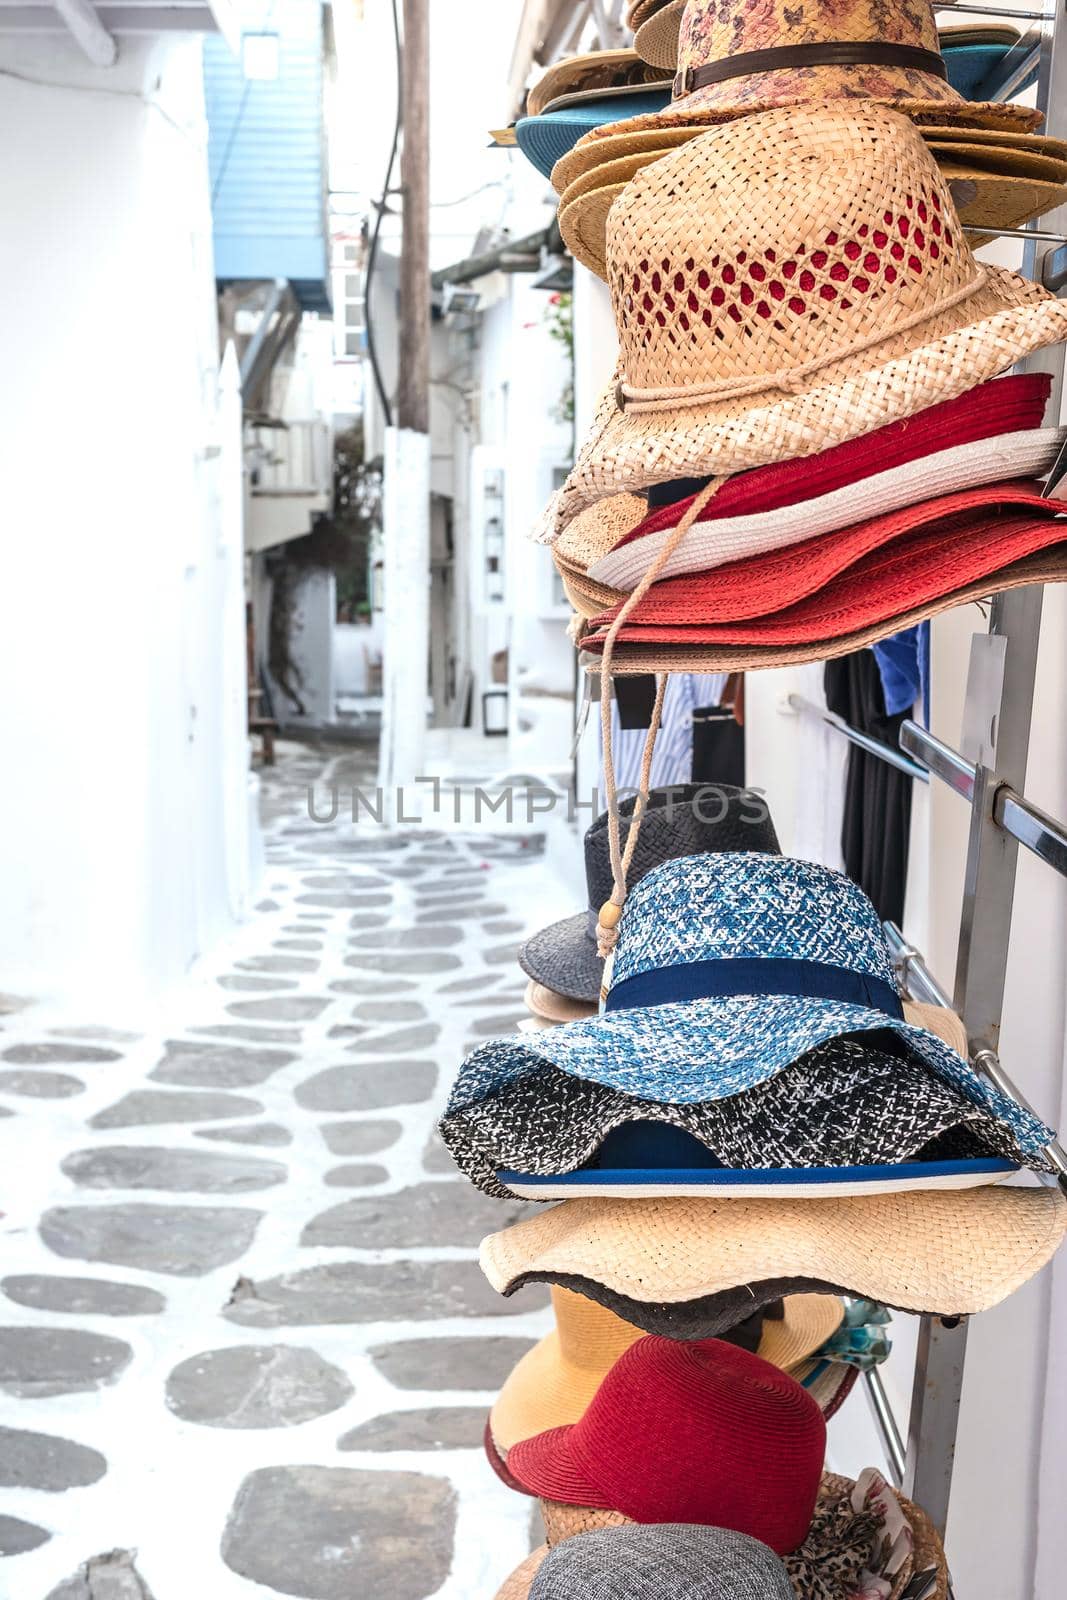 Colorful straw hats hanging on the market stall outdoor. Bright summer woman hats for sale on a street with white houses in Mikonas island, Greece.